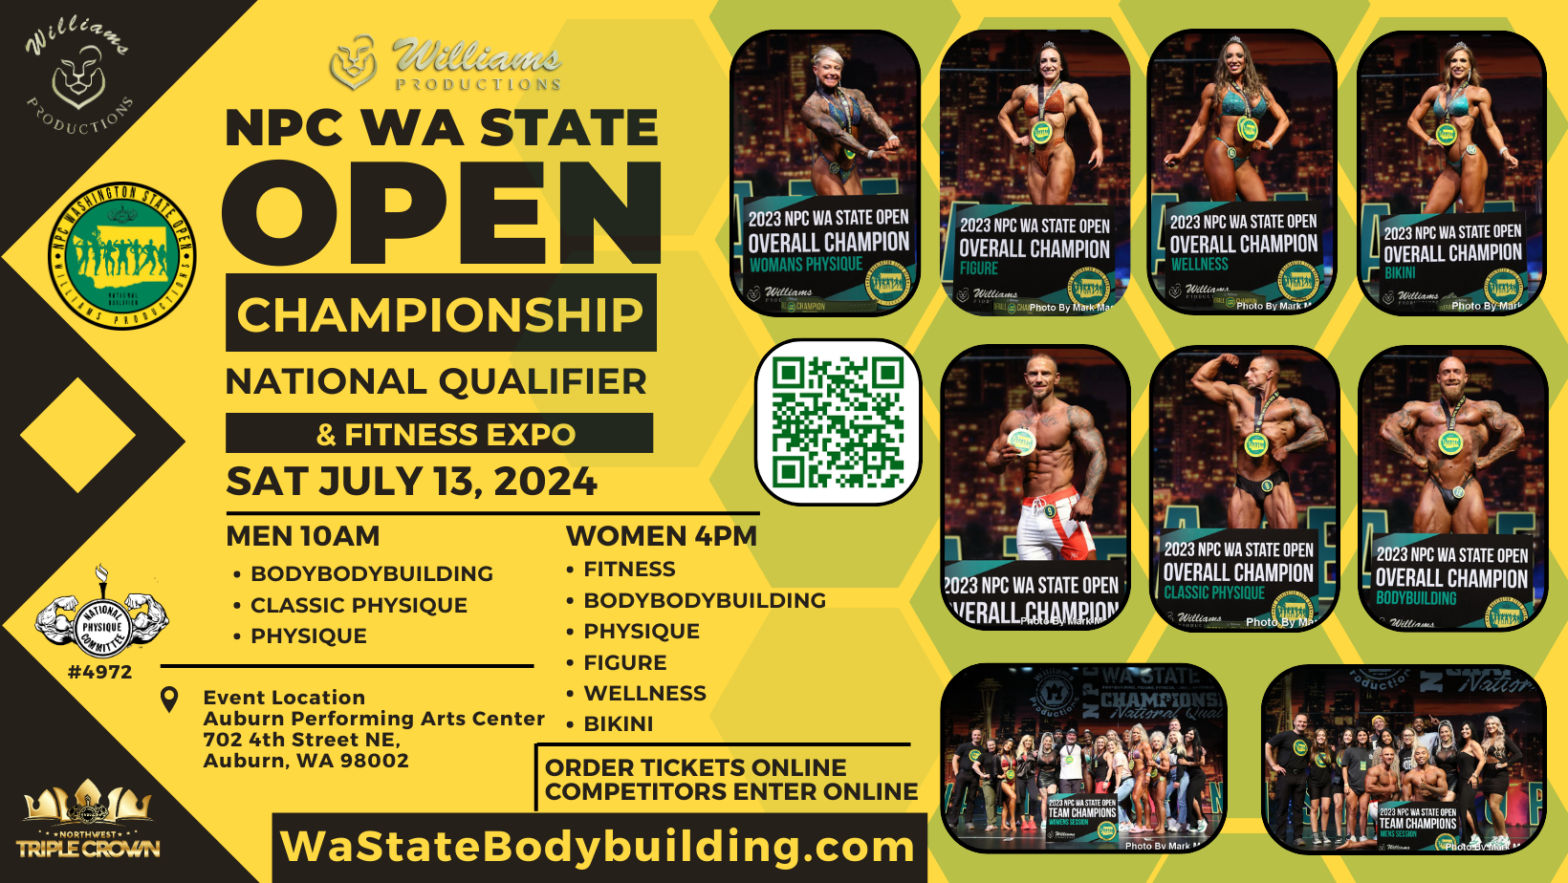 Vibrant image showcasing the excitement and energy of the NPC WA State Open Championships